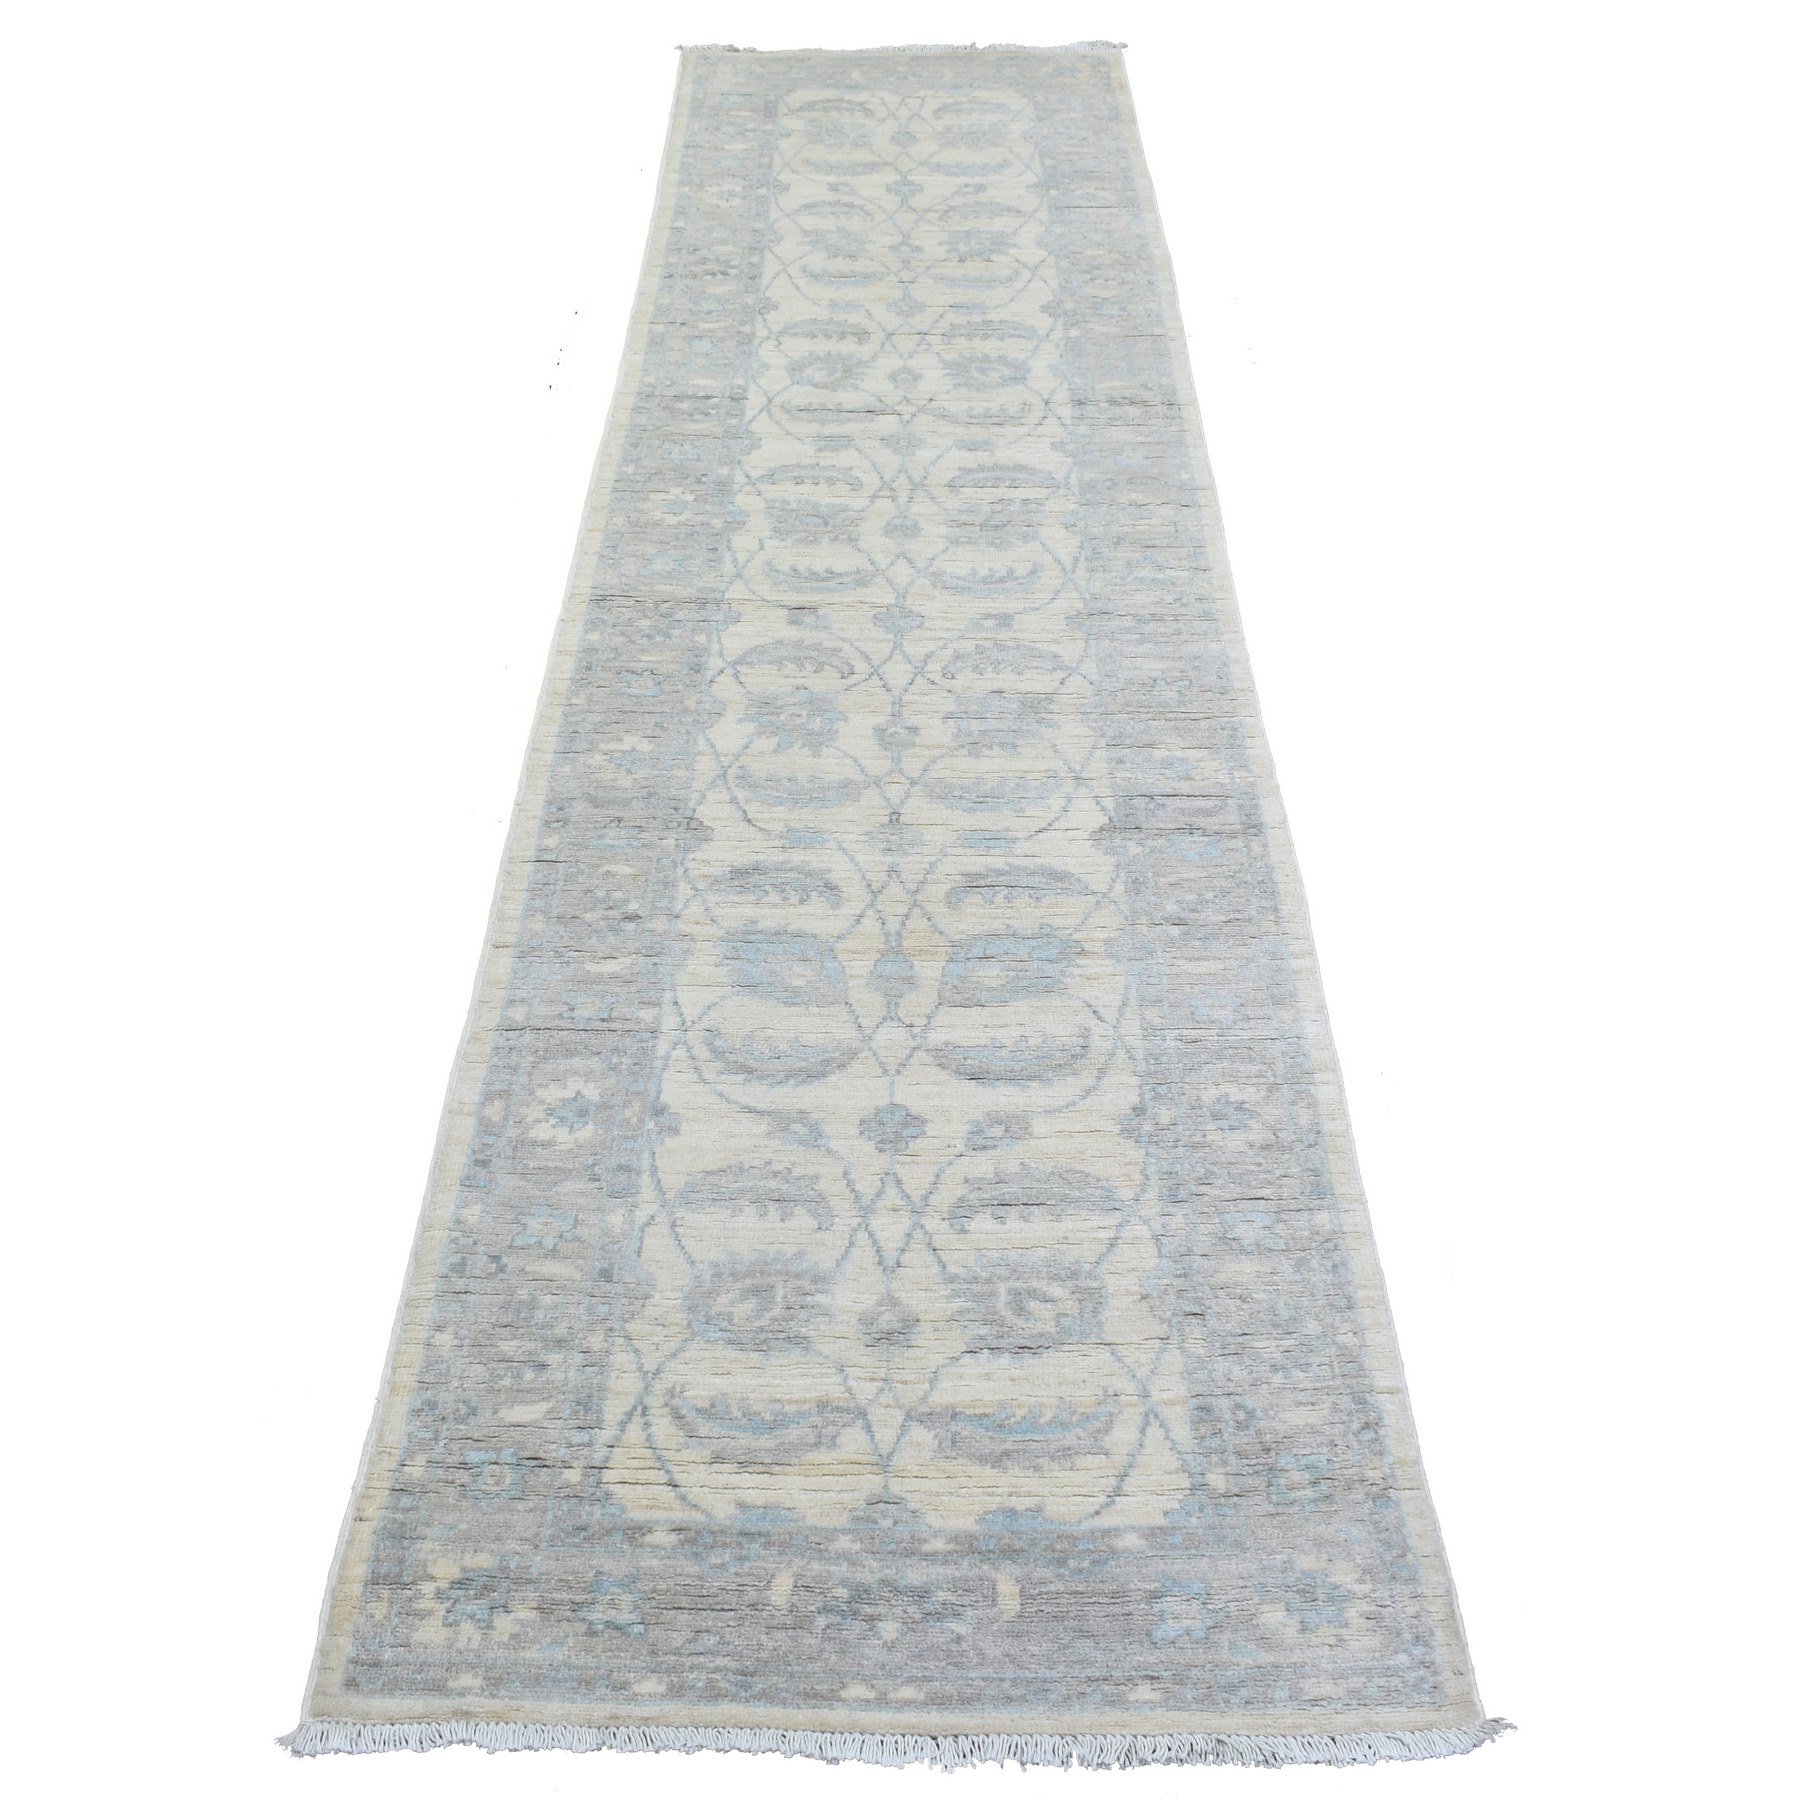 2'6"x9'8" Ivory, Hand Woven White Wash Peshawar with All Over Leaf Design, Natural Dyes Soft and Velvety Wool, Runner Oriental Rug 